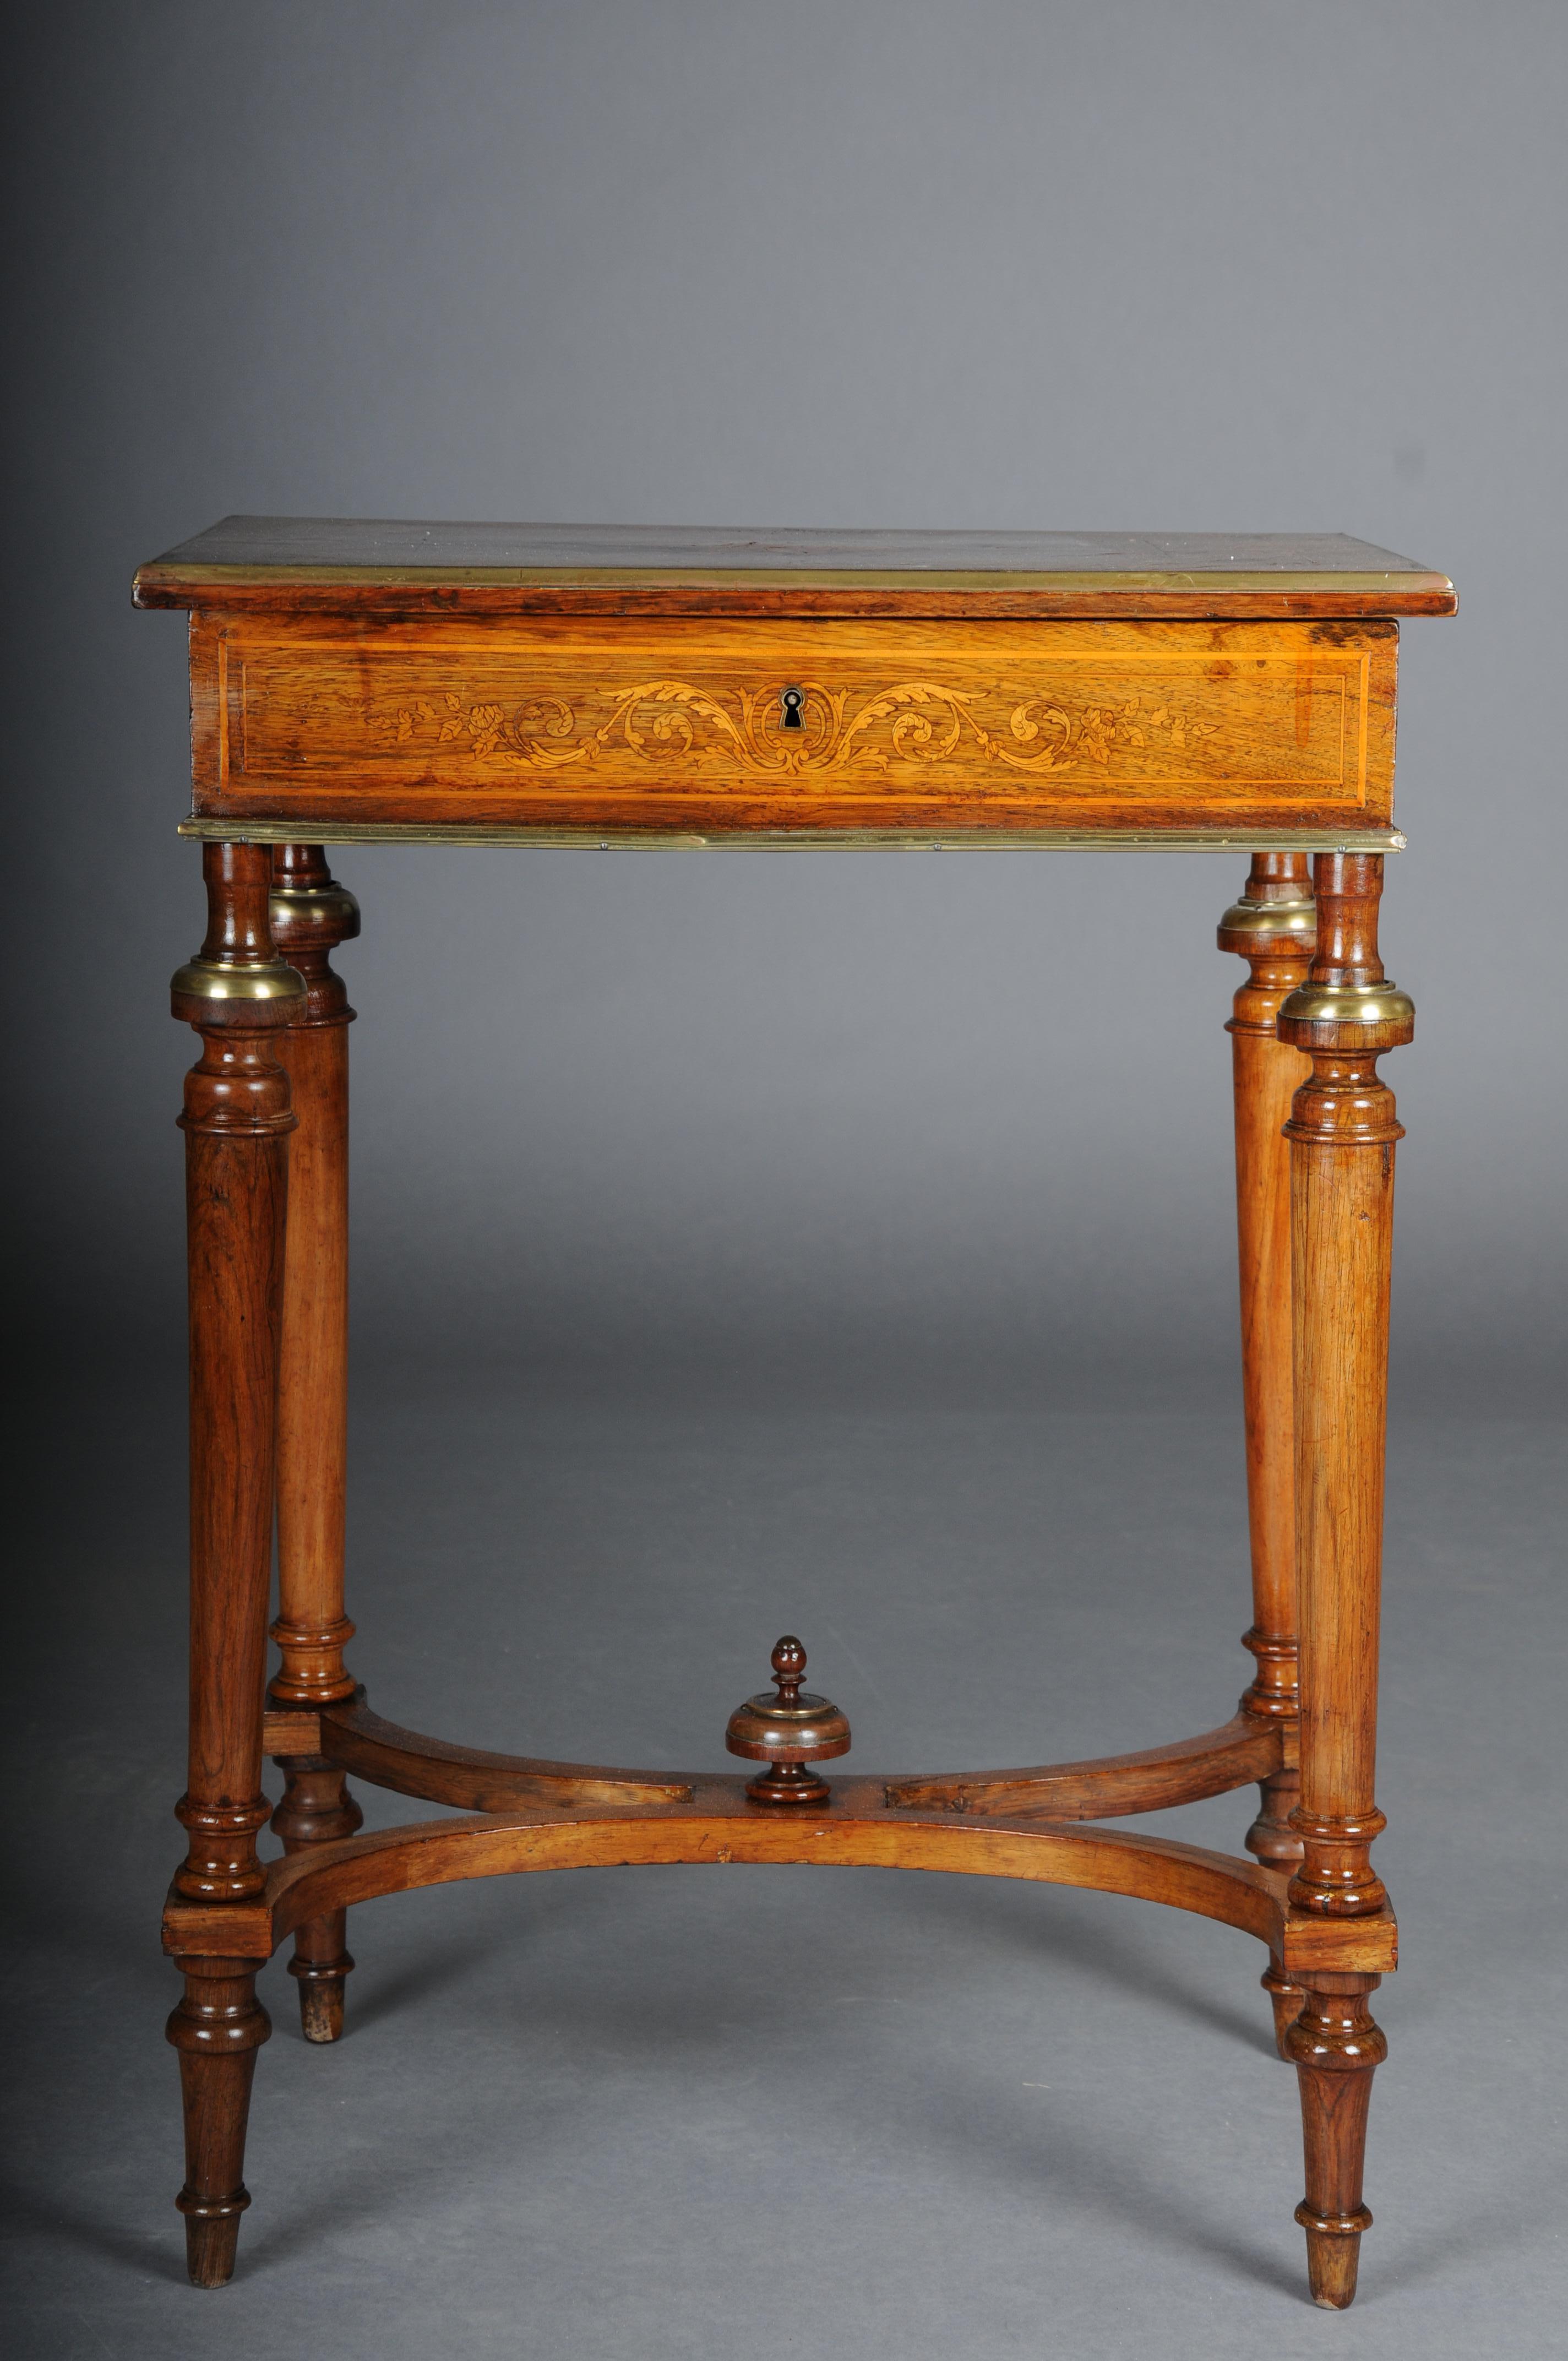 Antique inlaid side table/sewing table Napoleon III, brass

Solid wood body with fine veneer. Foldable cover plate, lockable.

Tapered tapered legs connected to your X-shaped center bar.

Measurement framed and refined.

Napoleon III around 1870,